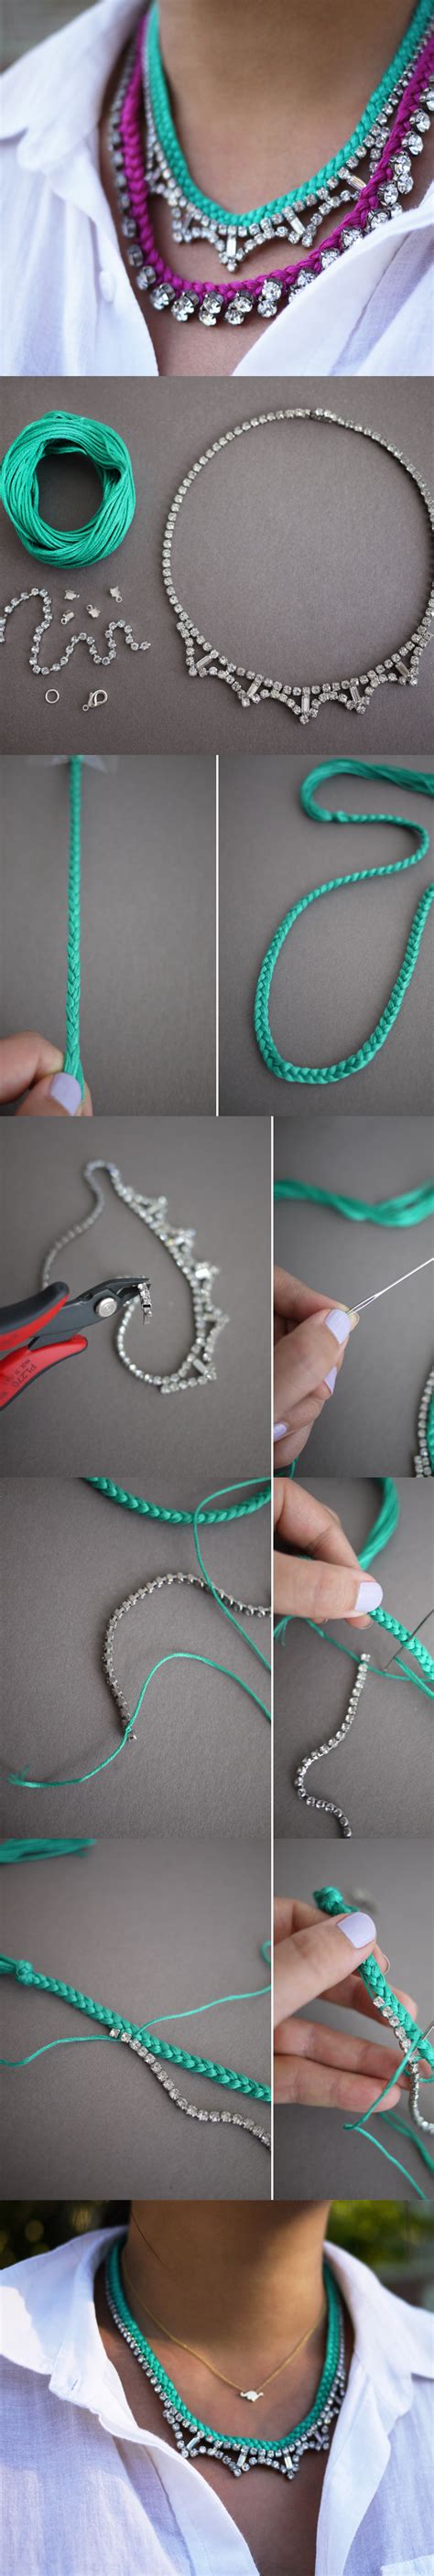 Diy The Most Beautiful Necklace Do It Yourself Ideas